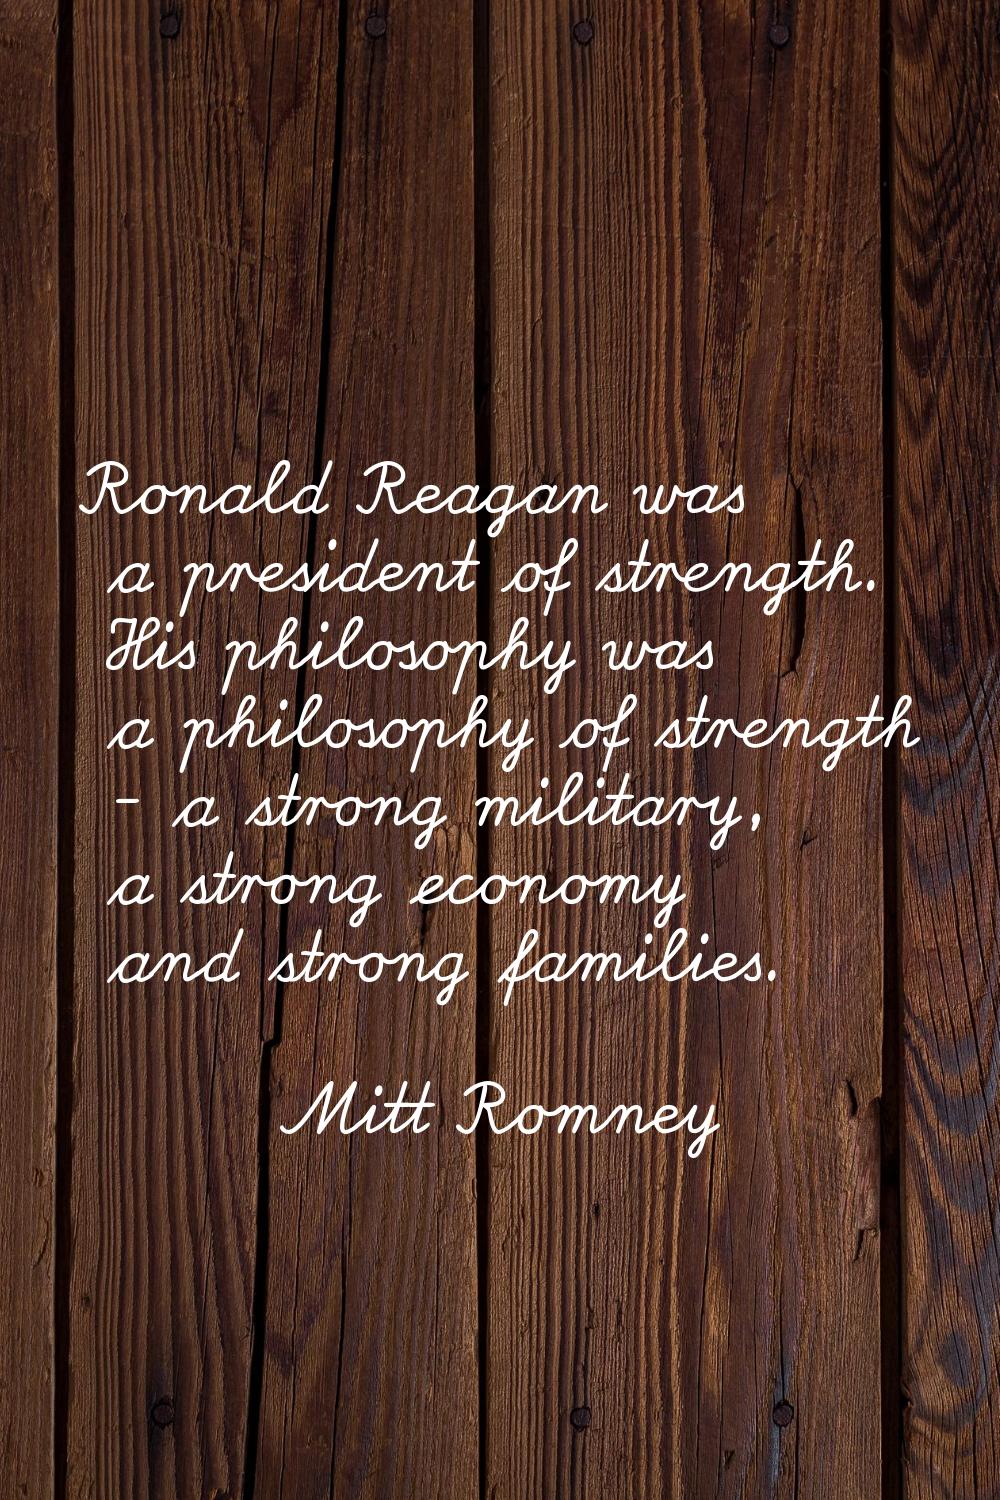 Ronald Reagan was a president of strength. His philosophy was a philosophy of strength - a strong m